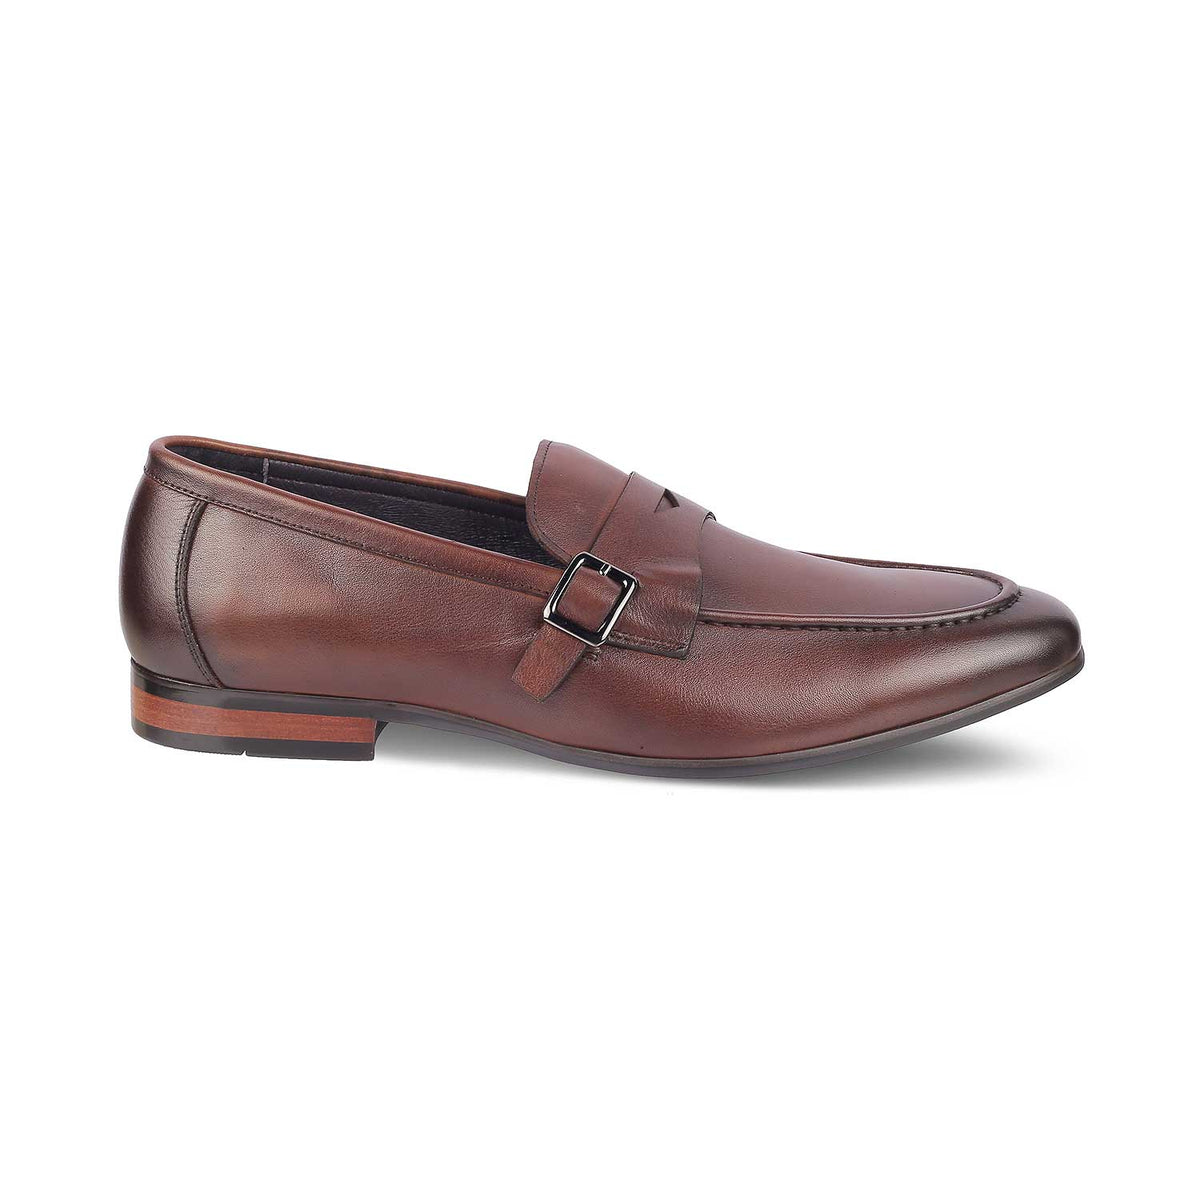 Tresmode Neno Brown Men's Leather Loafers - Tresmode